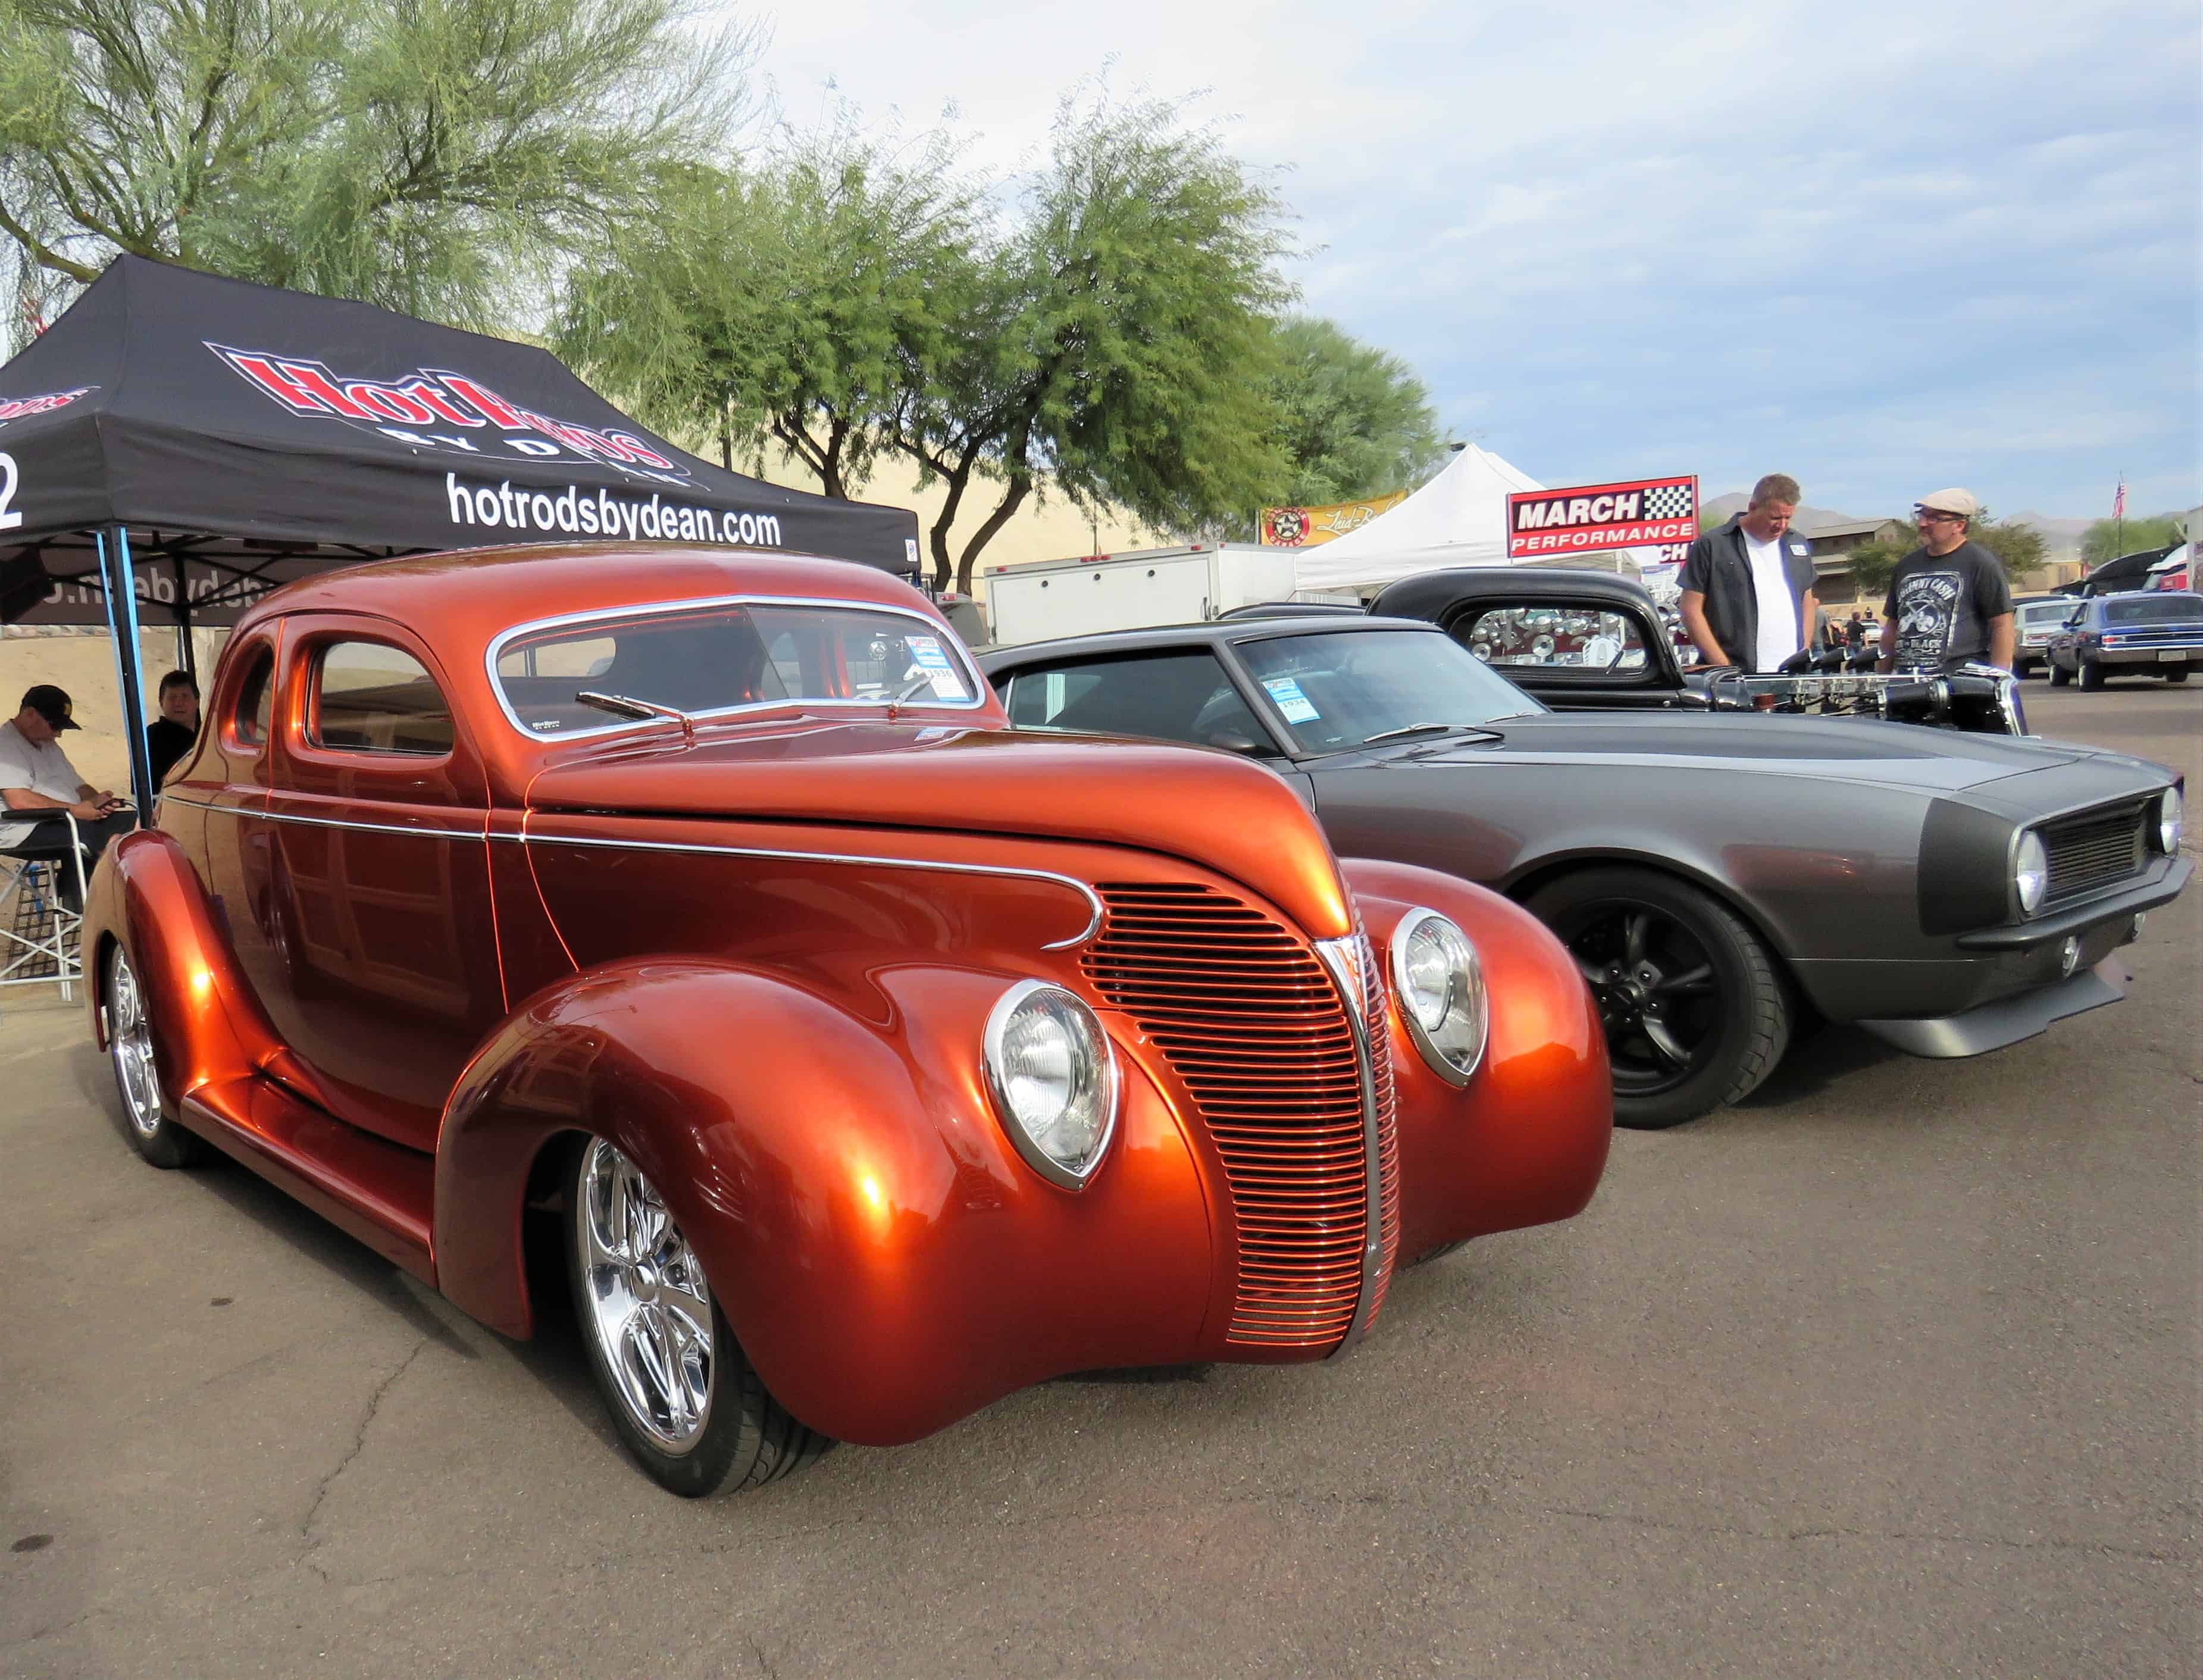 Goodguys grand finale in Scottsdale | ClassicCars.com Journal